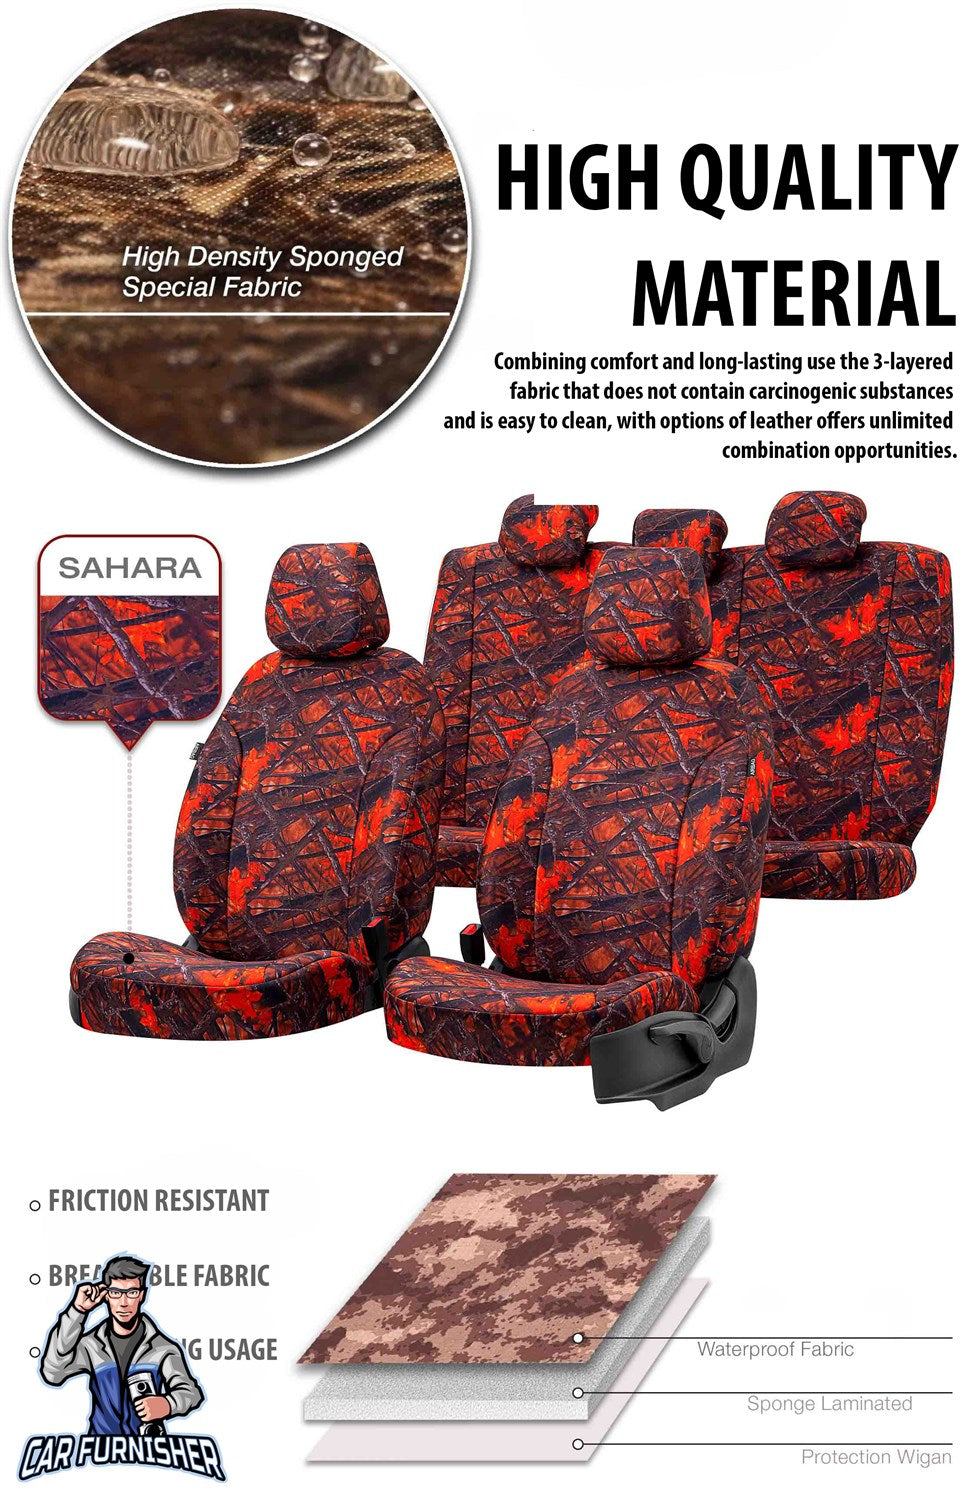 Chevrolet Spark Seat Covers Camouflage Waterproof Design Montblanc Camo Waterproof Fabric